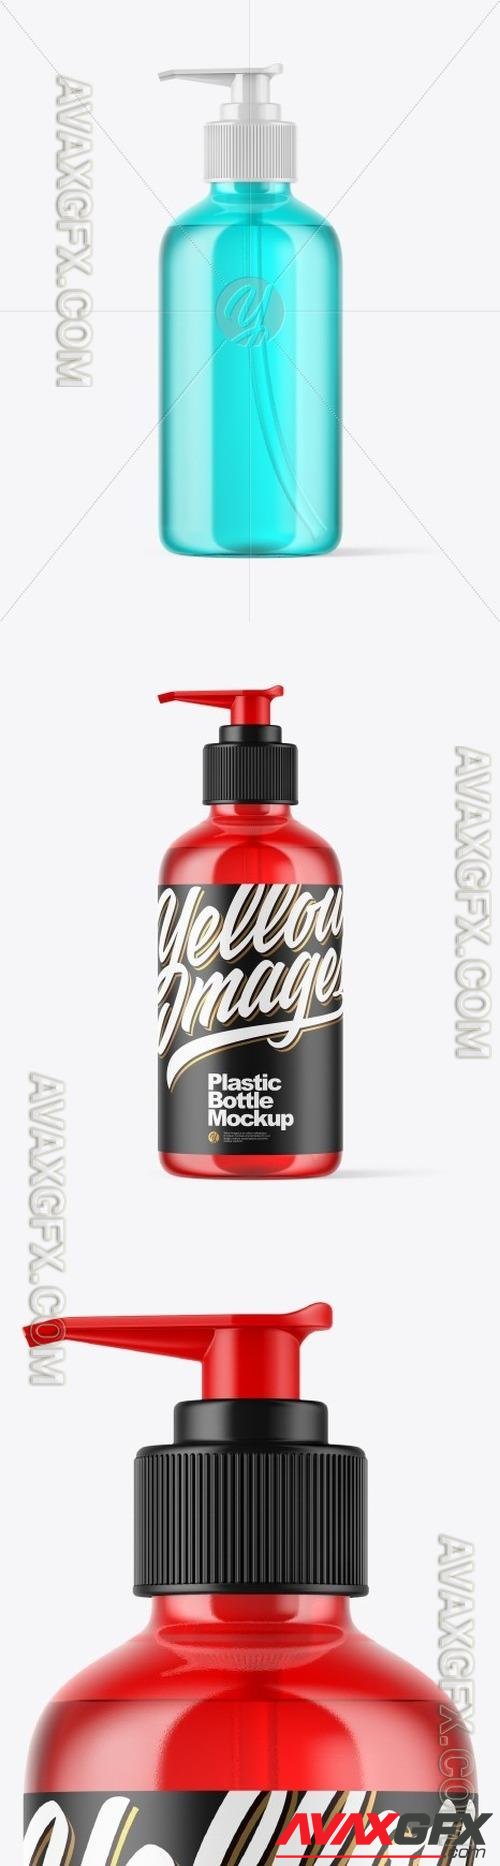 Plastic Cosmetic Bottle with Pump Mockup 49988 TIF